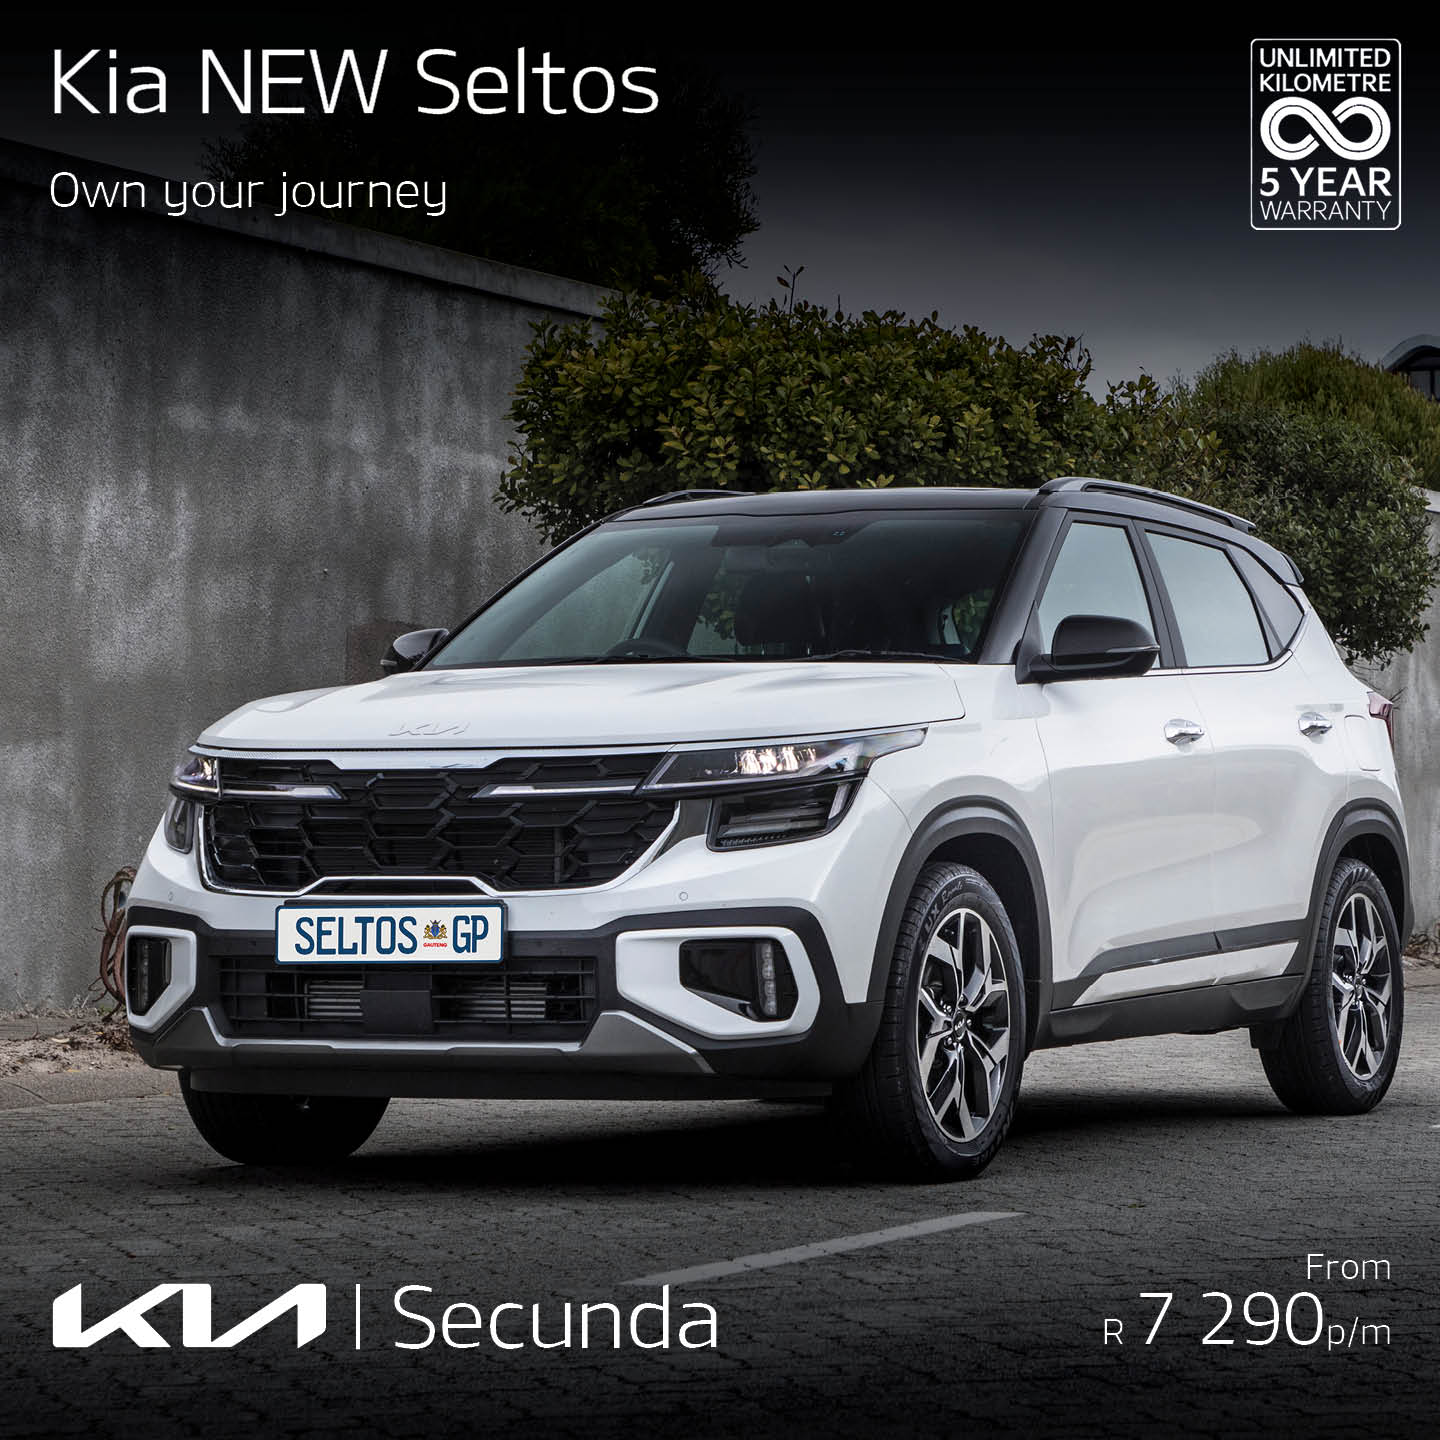 Own your journey with the NEW KIA SELTOS image from Eastvaal Motors